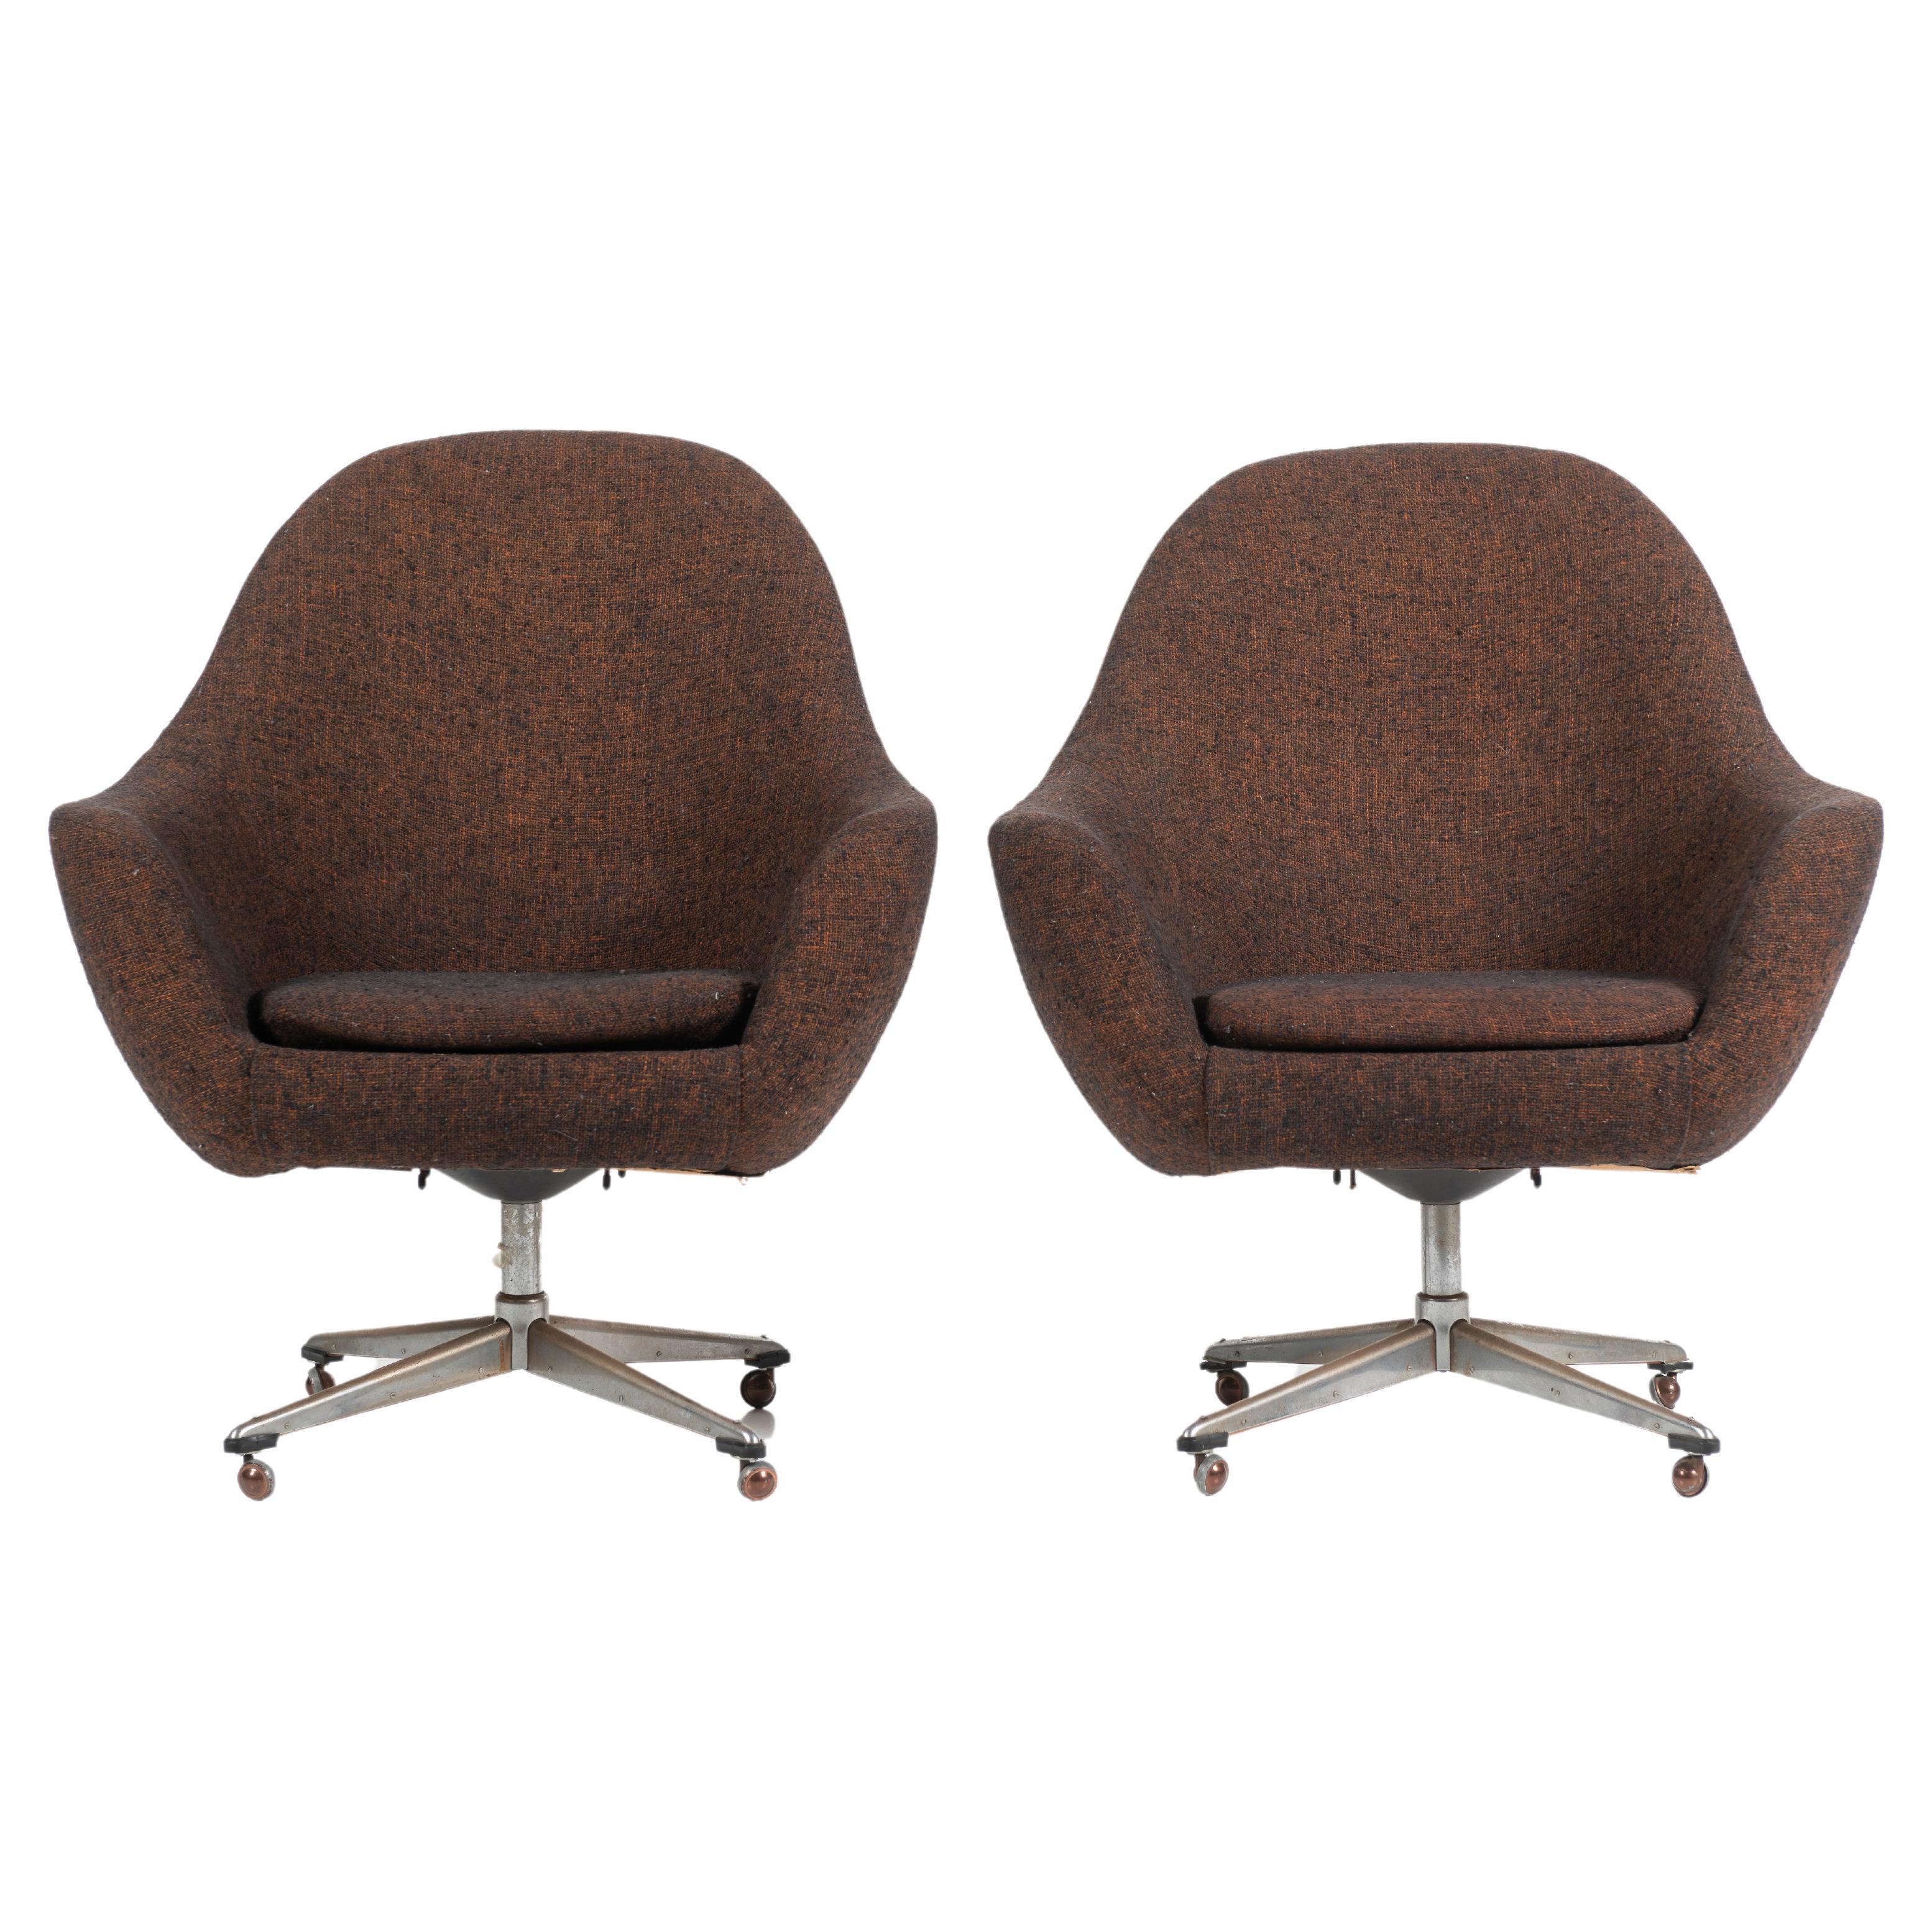 Pair of Mid-Century Modern Wool Overman Swivel Chairs, with Casters, Sweden 1960